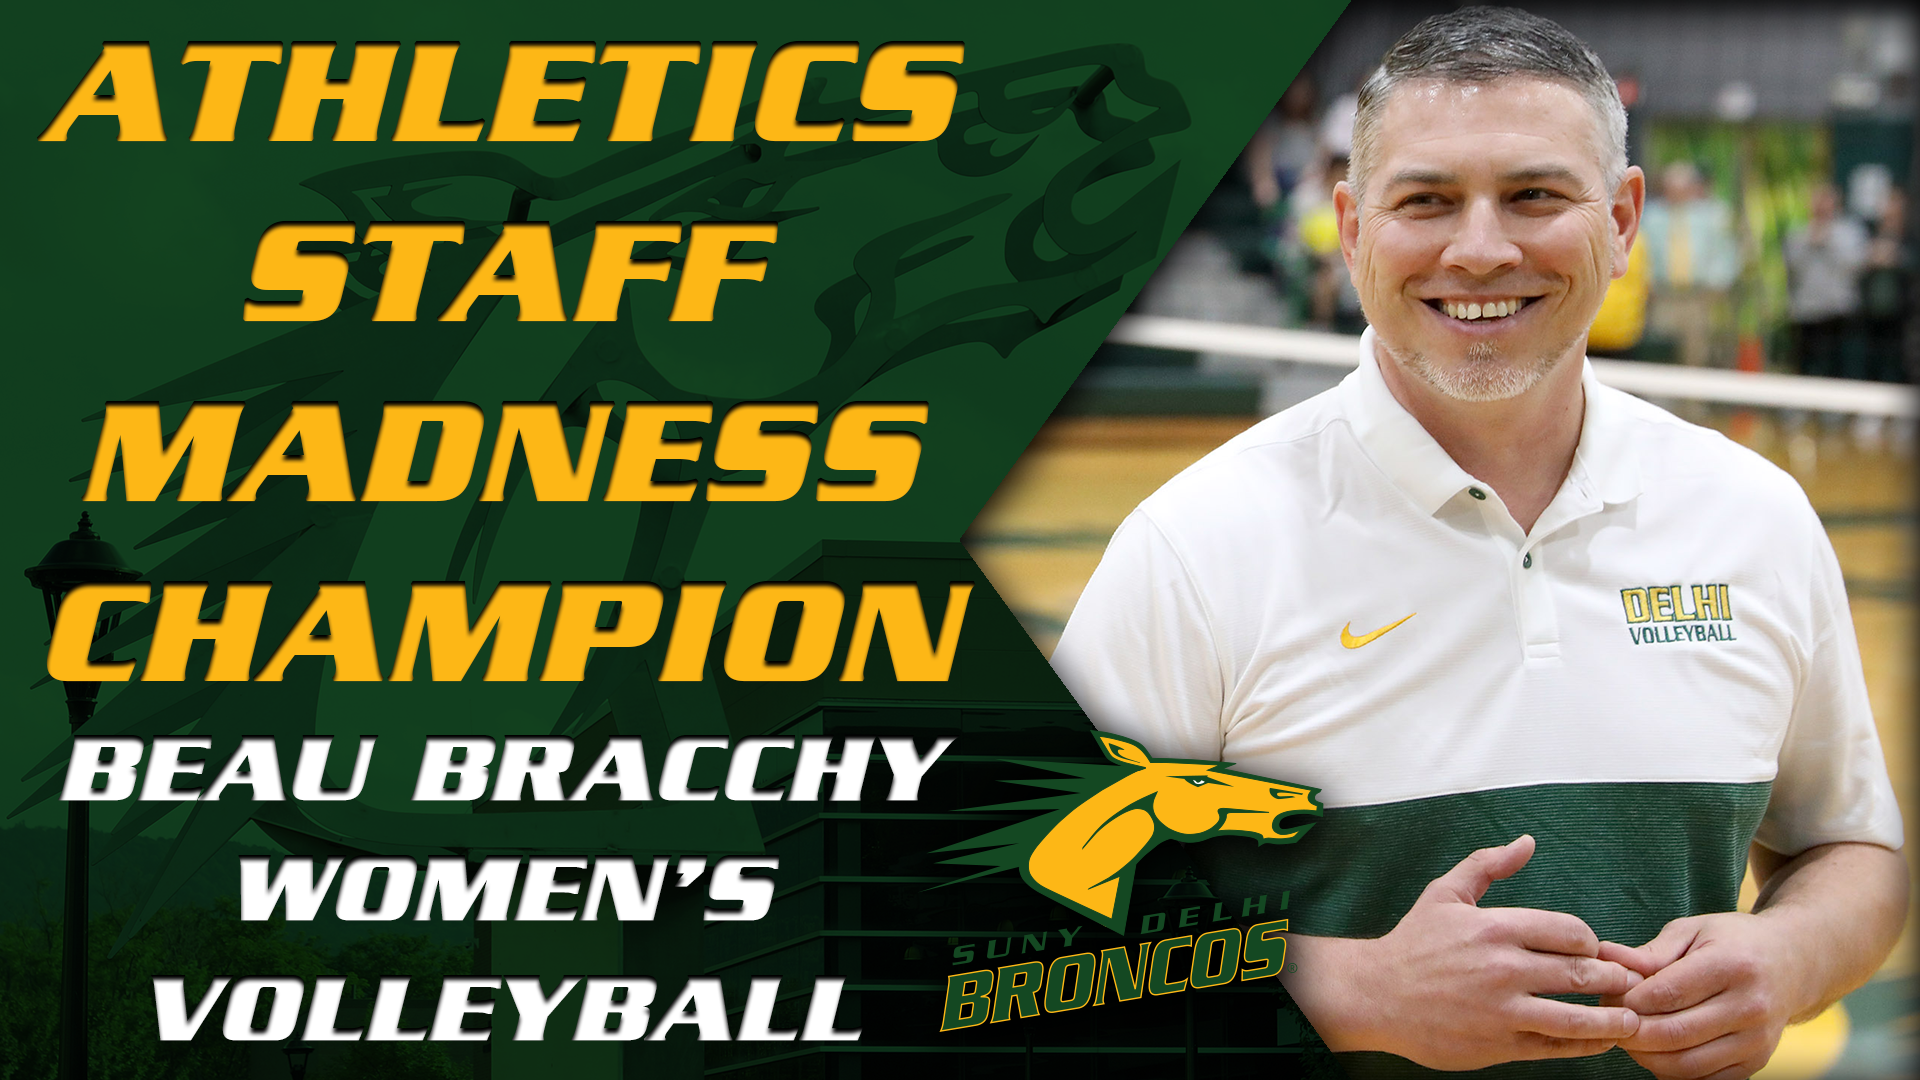 Bracchy Comes Out Victorious as Athletics Staff Madness Champion